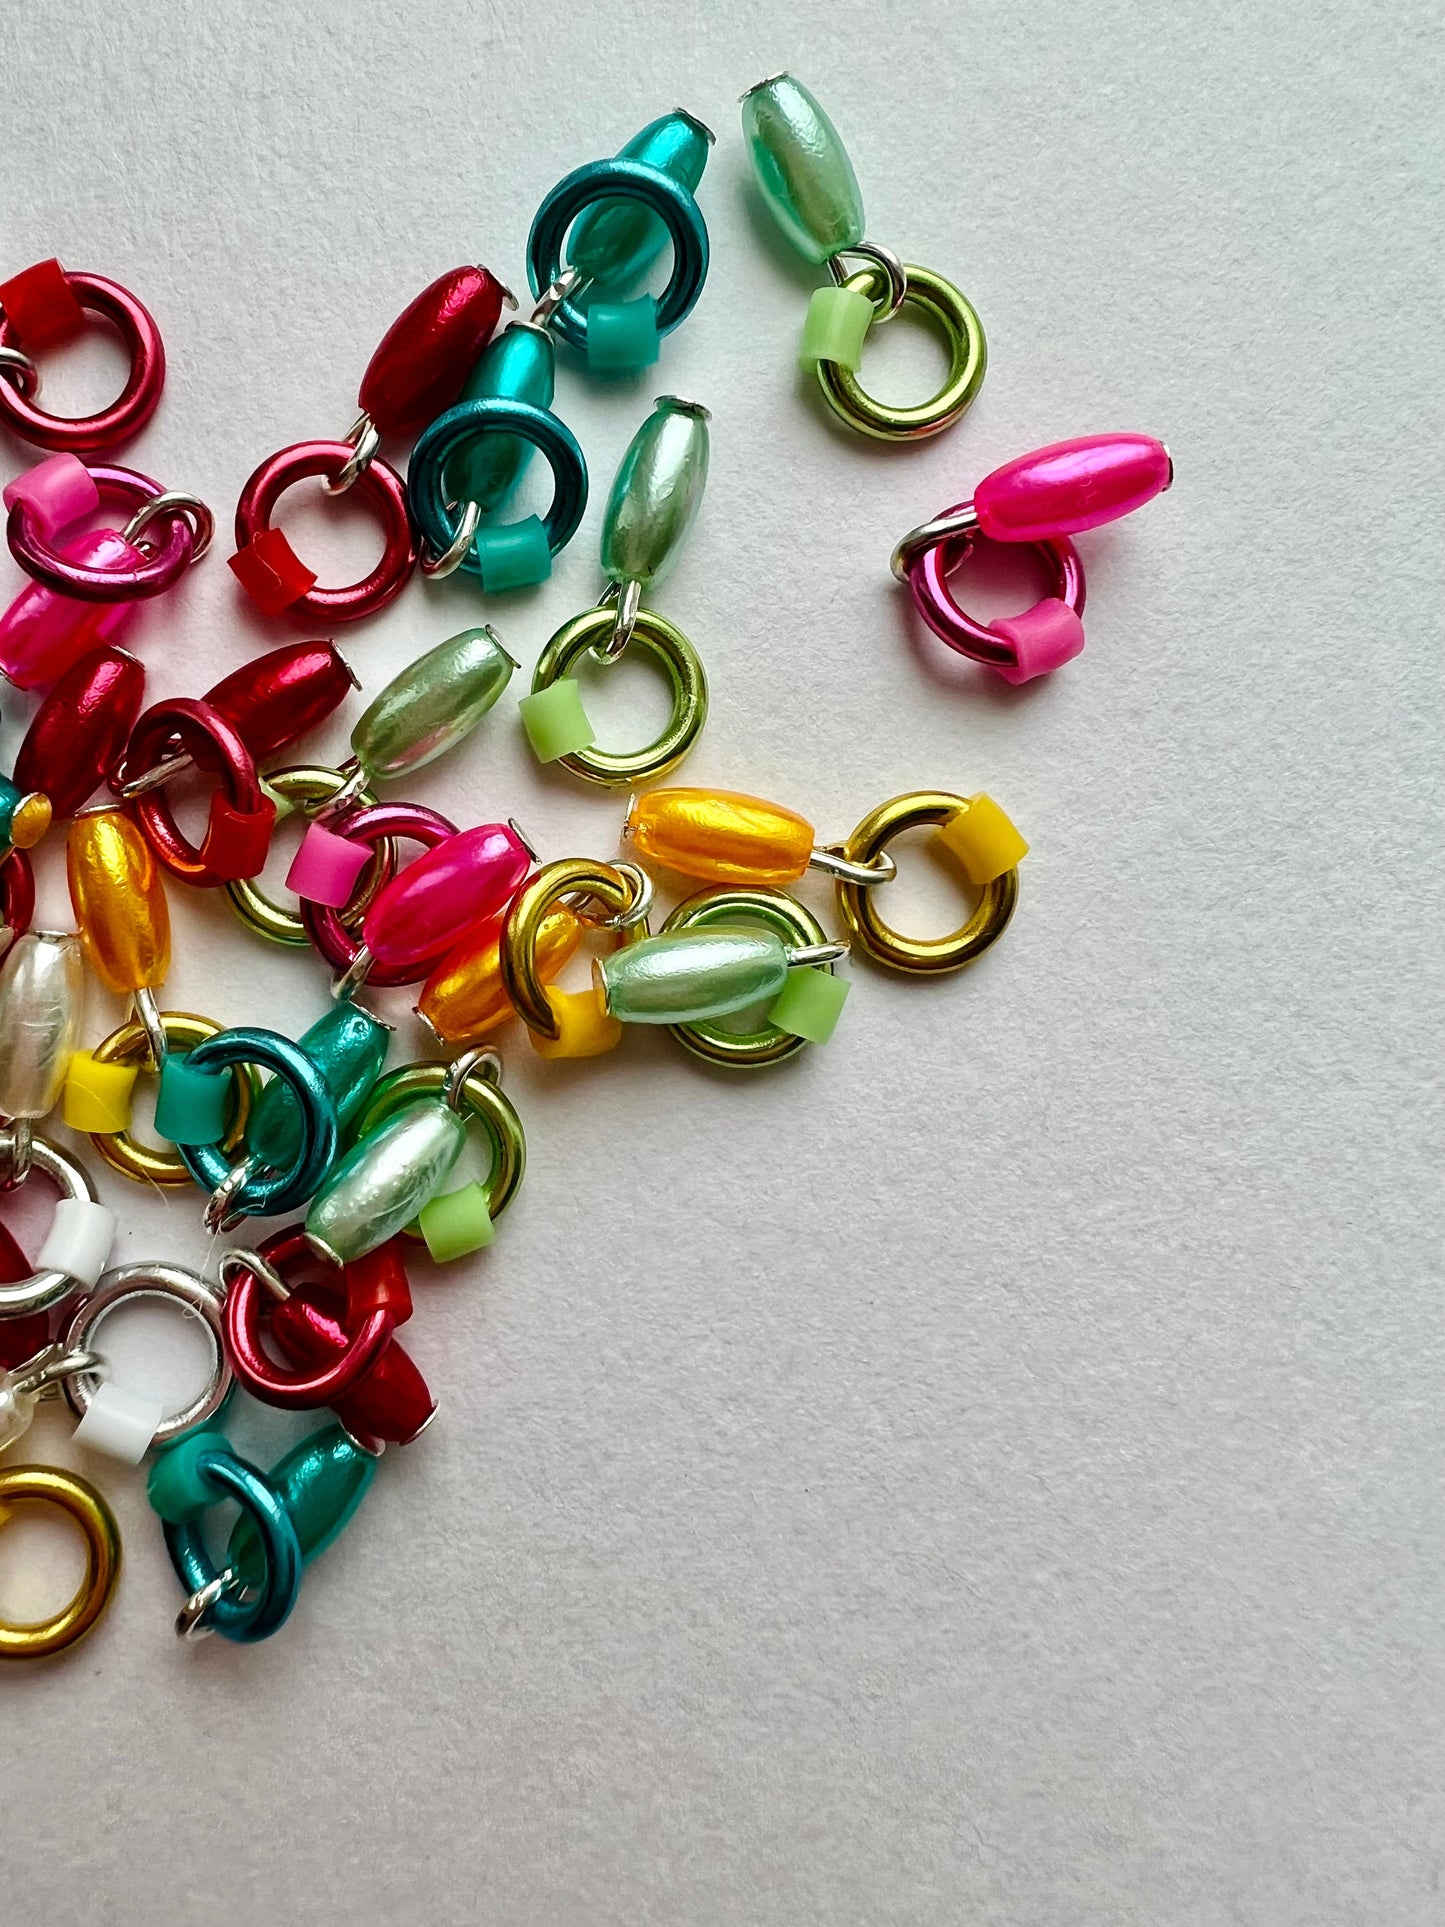 Rainbow Mini Stitch Markers for Sock & Lace Knitting - Snag Free - Sock Pips